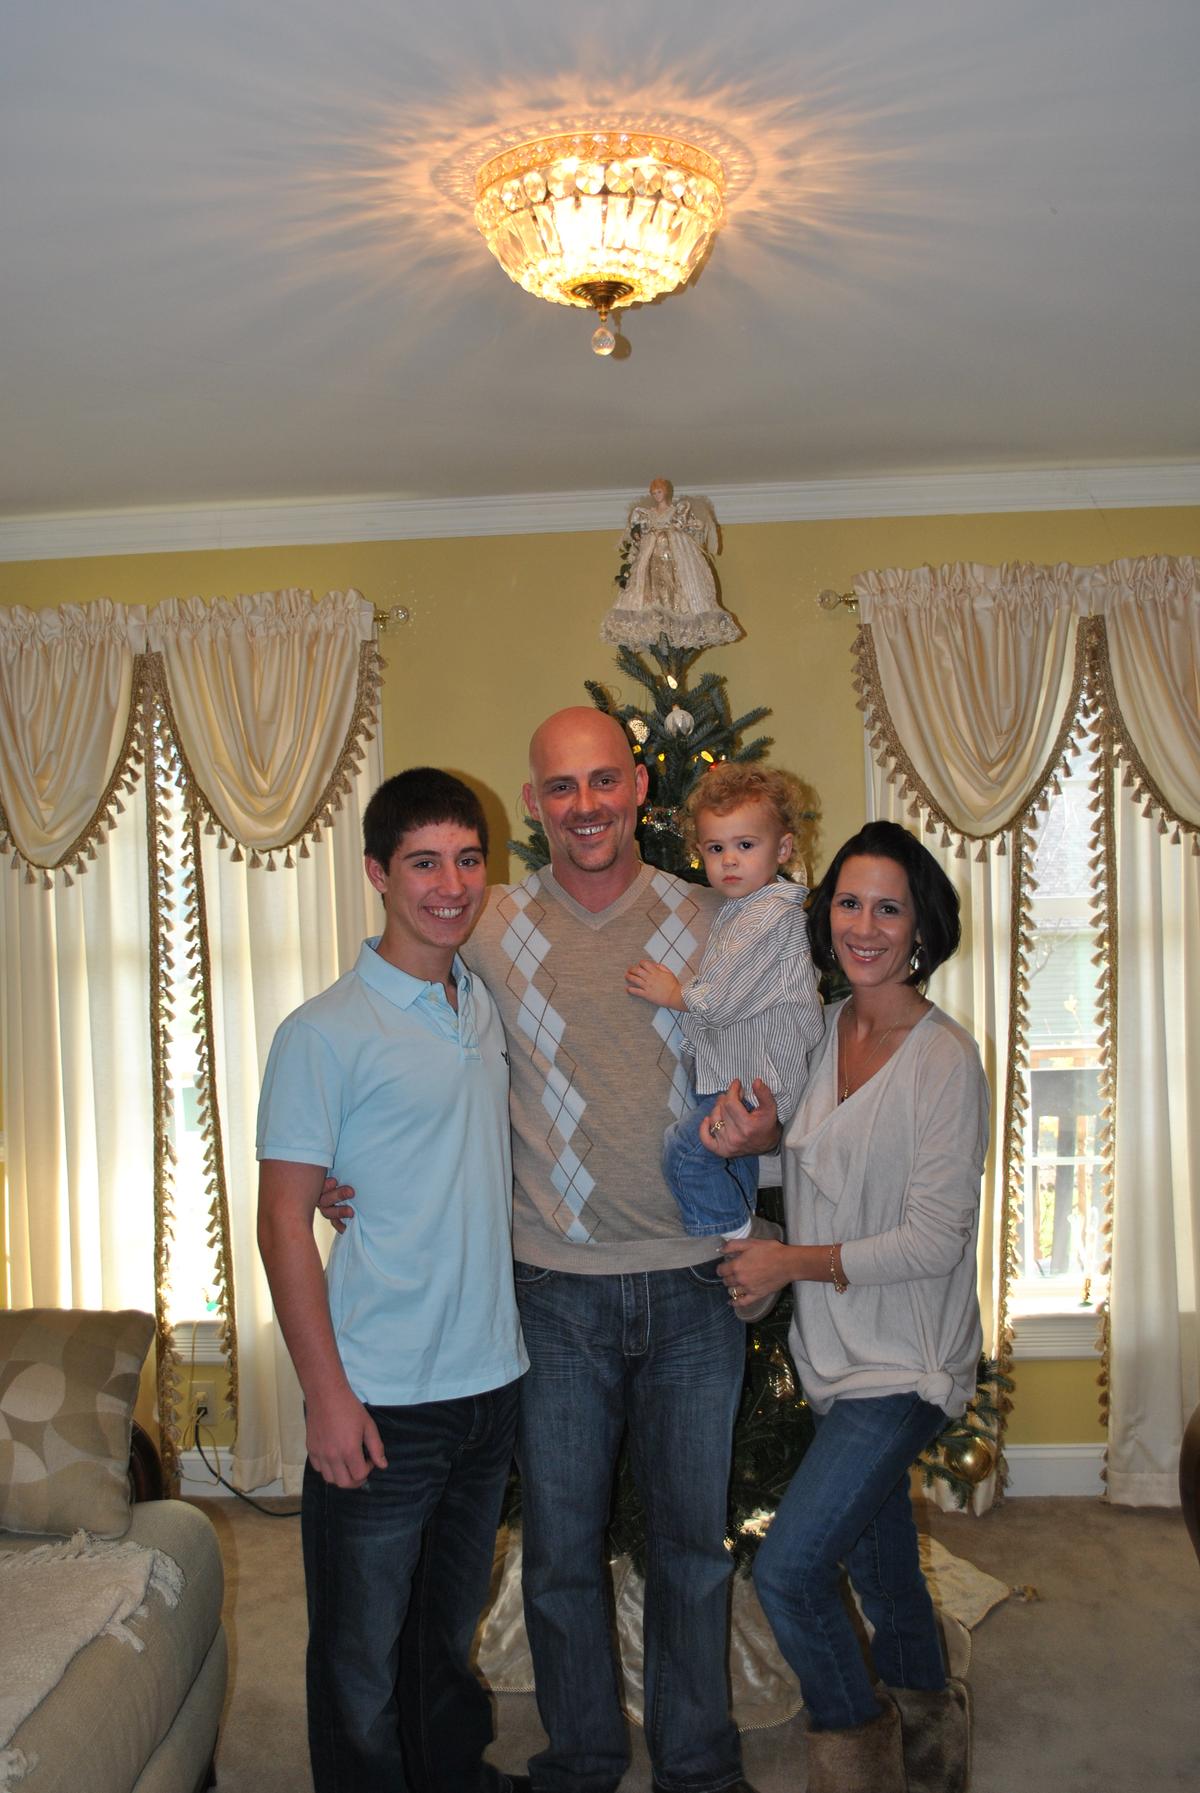 Darin Hamm with his wife, Jennifer, and two sons, Dylan and Griffin. (Courtesy of Jennifer Hamm)